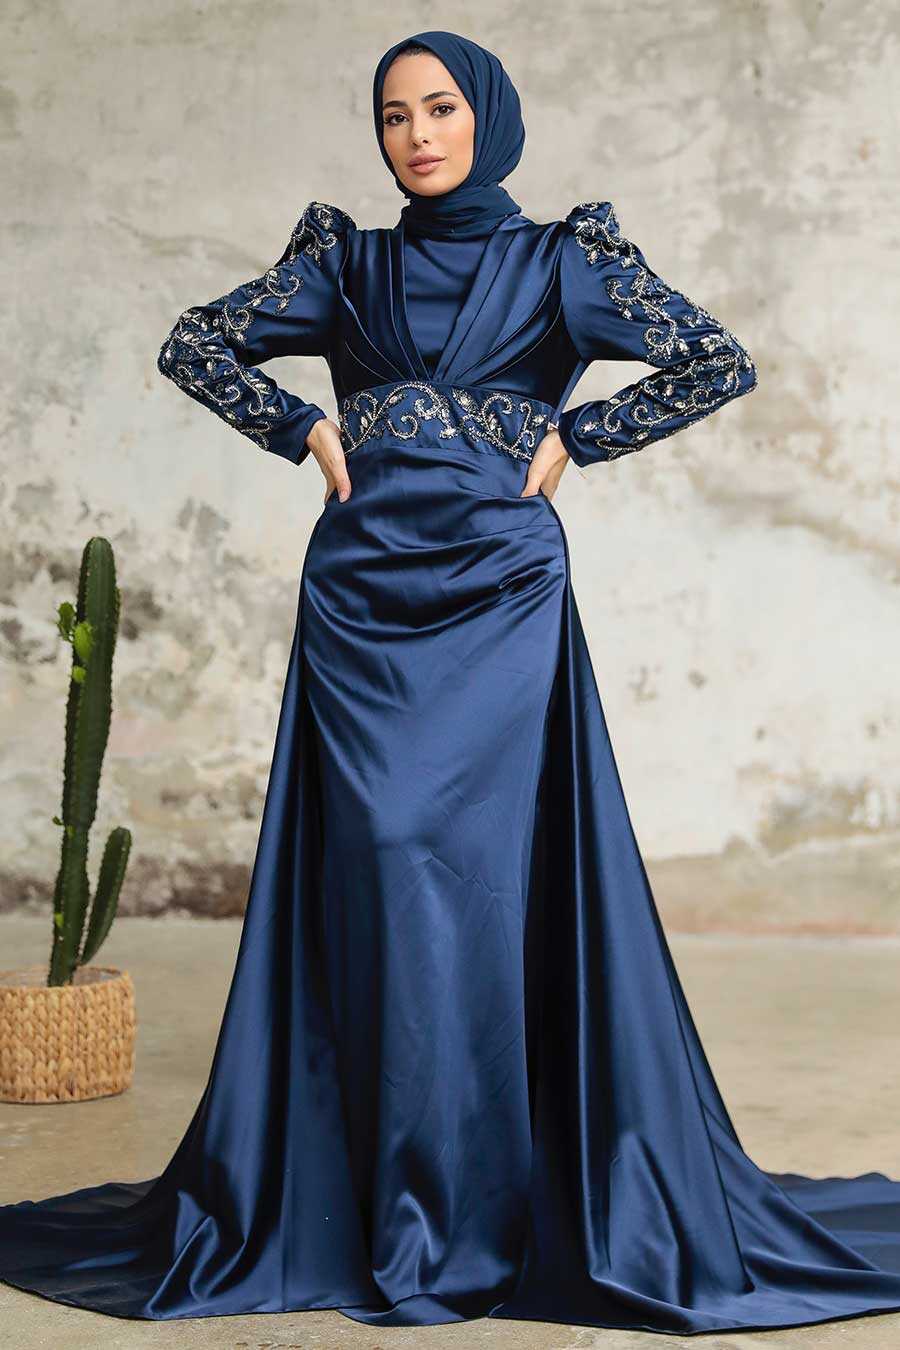 V-neck Navy Blue Long Dress For Women Wedding Party frock Gown Lace  Sleeveless | eBay